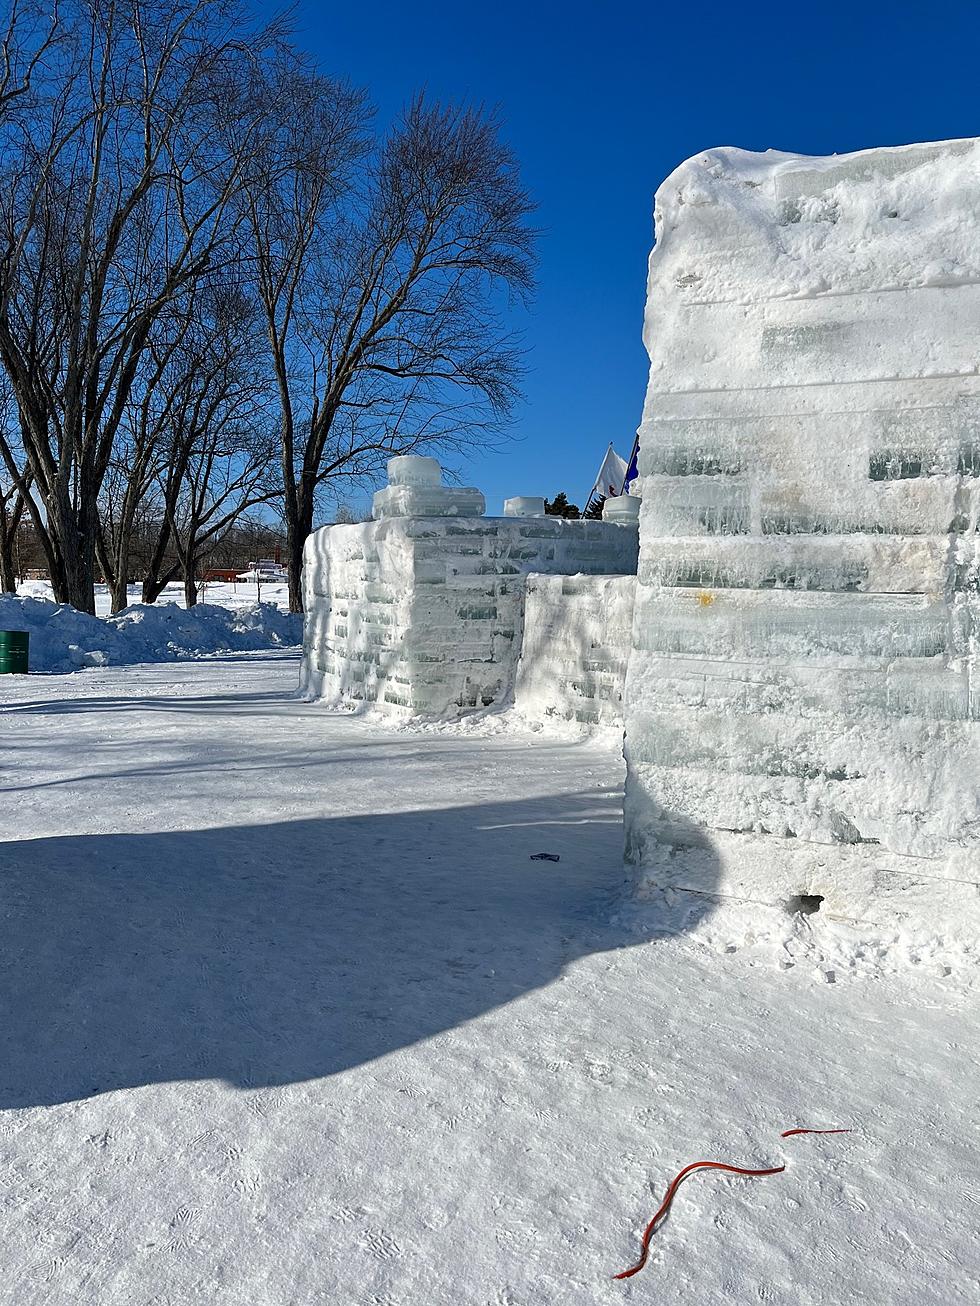 Enormous Ice Chunks Stacked To Make A Castle In Chautauqua [PHOTOS]